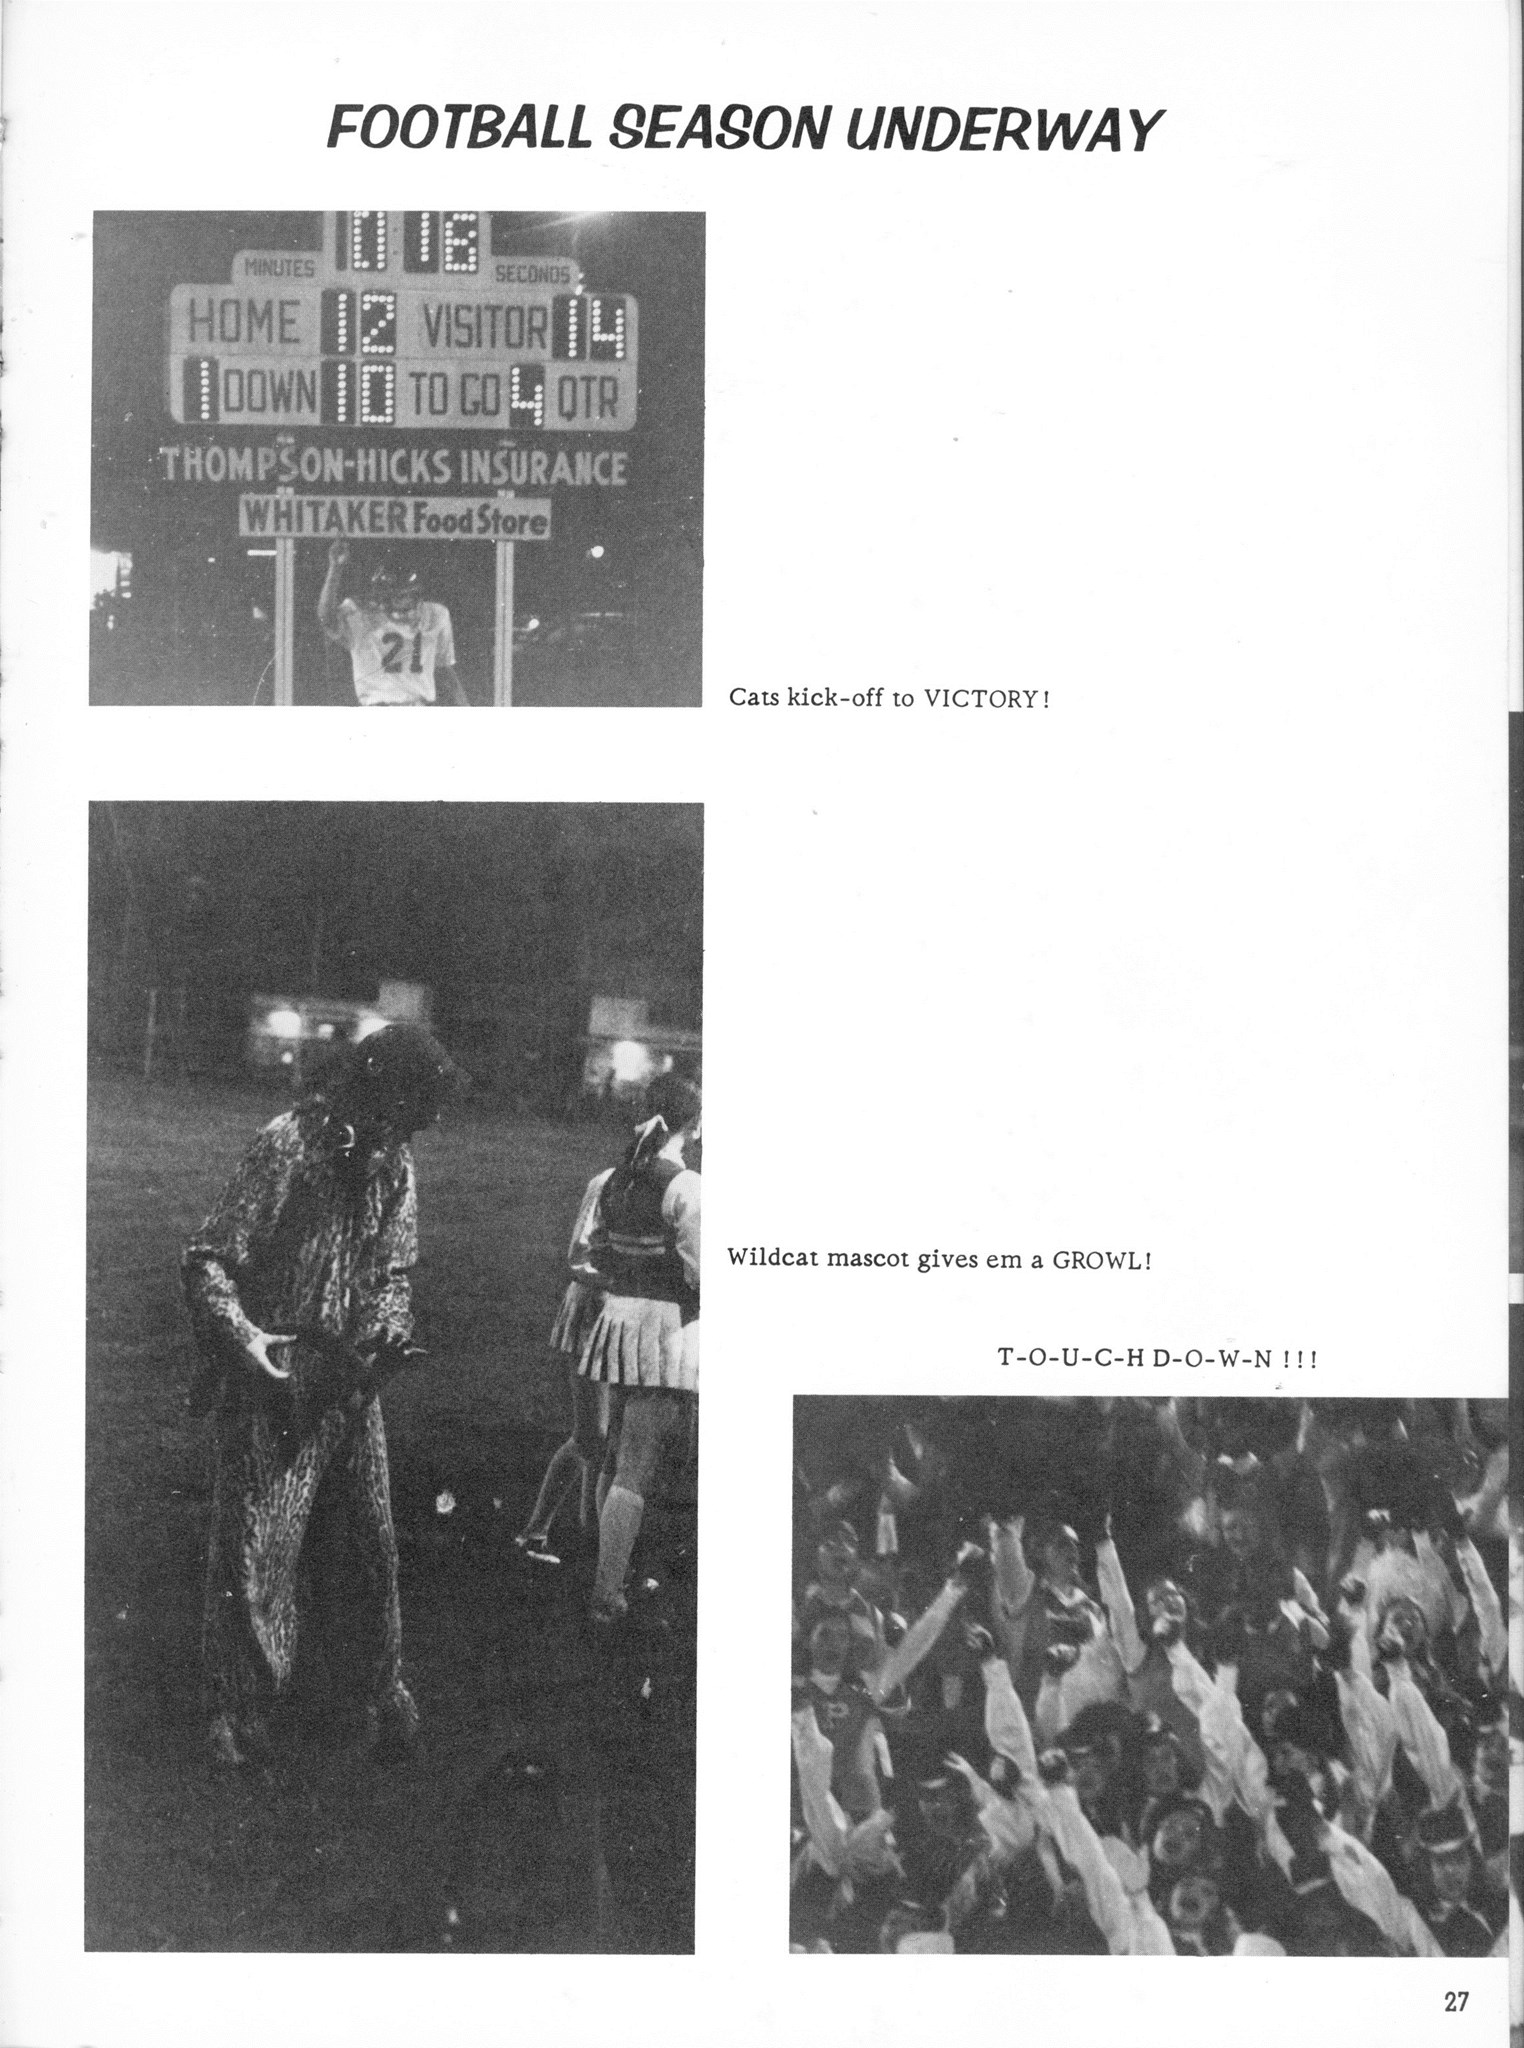 ../../../Images/Large/1975/Arclight-1975-pg0027.jpg